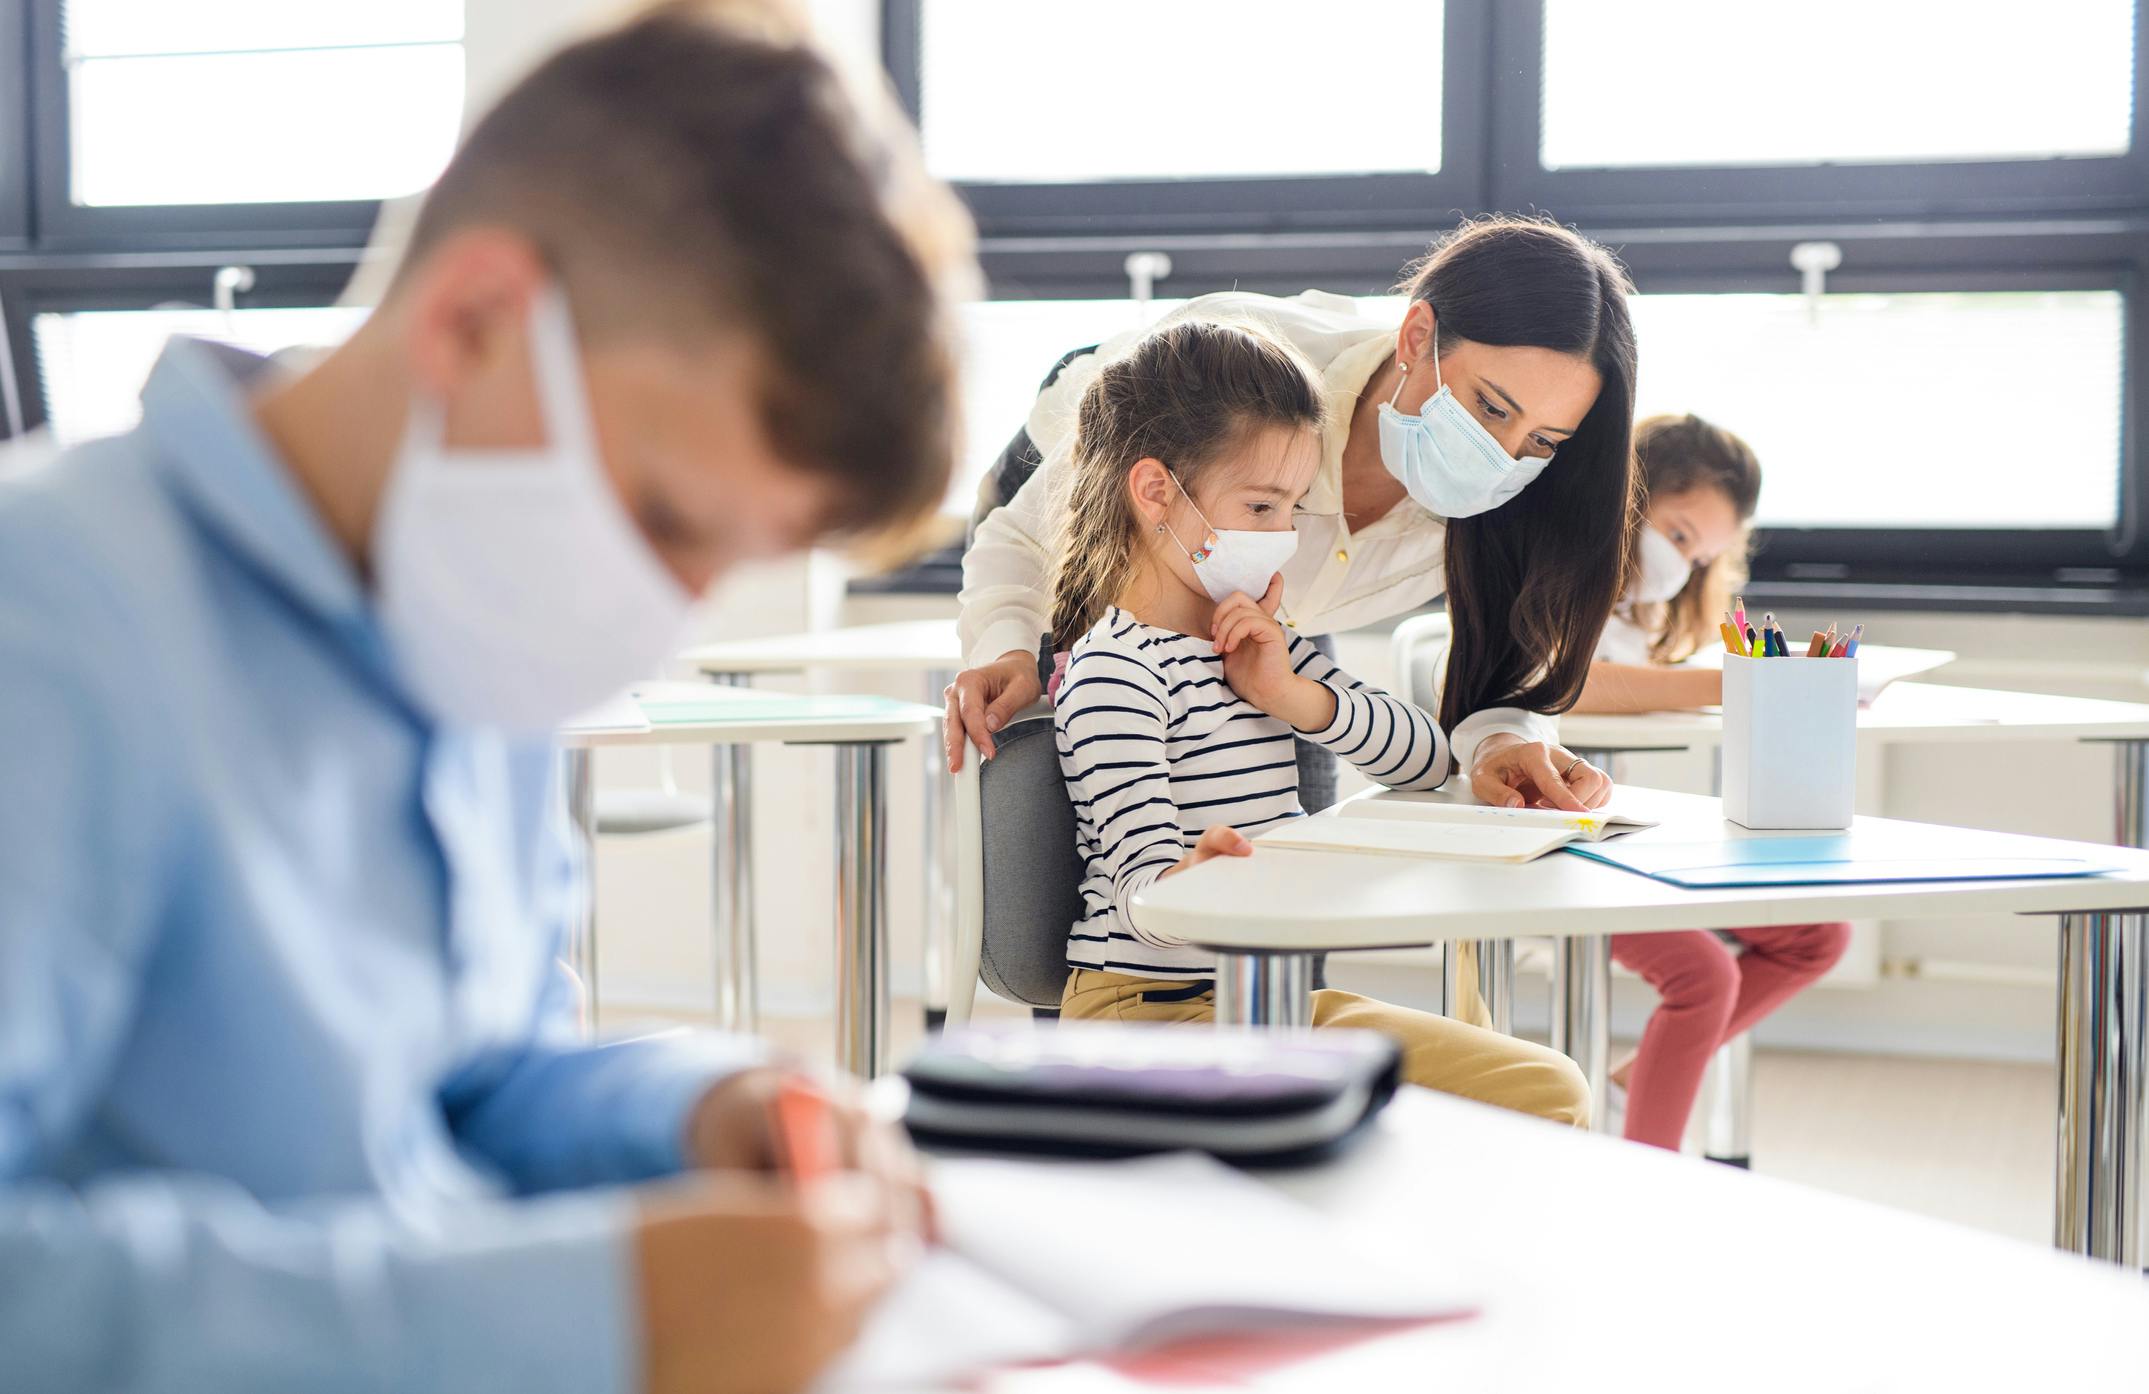 Three students sit socially distanced, wearing masks, in a classroom while a teacher helps one girl with her work. 